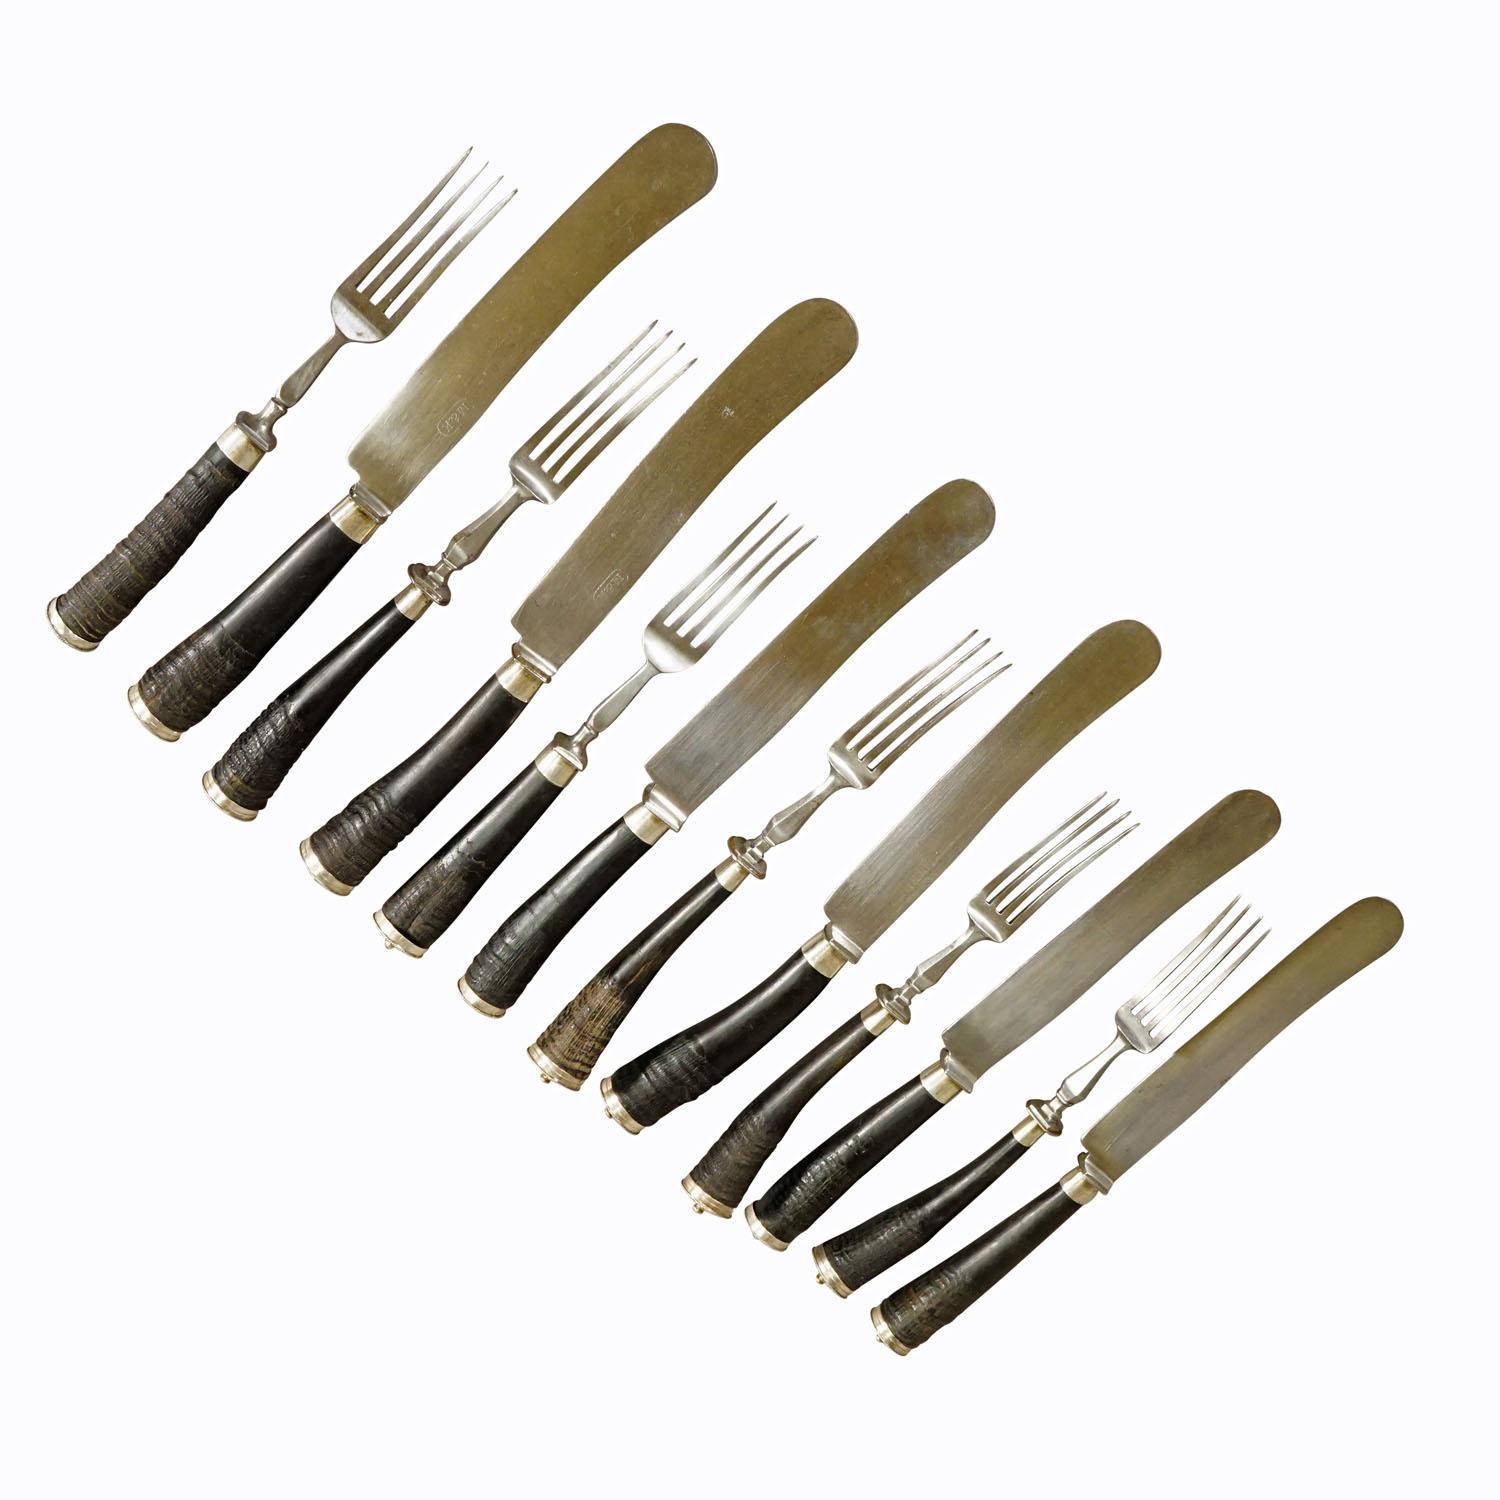 Antique set of rustic hunters cutlery with chamois horn handles

A rustic set of six knives and forks. The handles are made of genuine chamois horn and feature a decorated silver knob on their ends. The blades are made of galvanized metal.